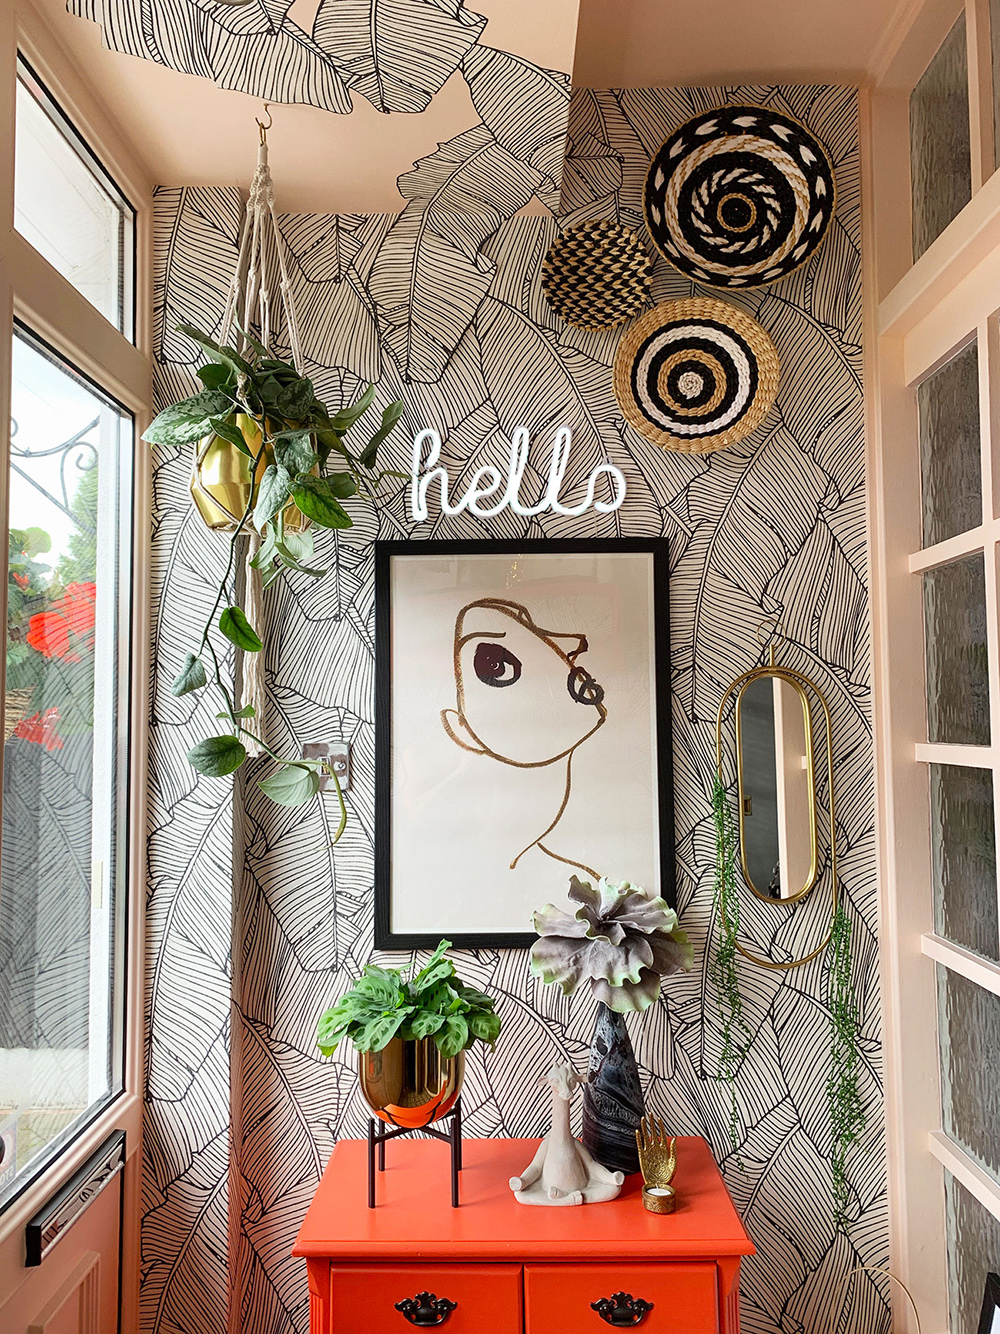 Quirky porch decor inspiration with orange cabinet and monochrome patterned wallpaper